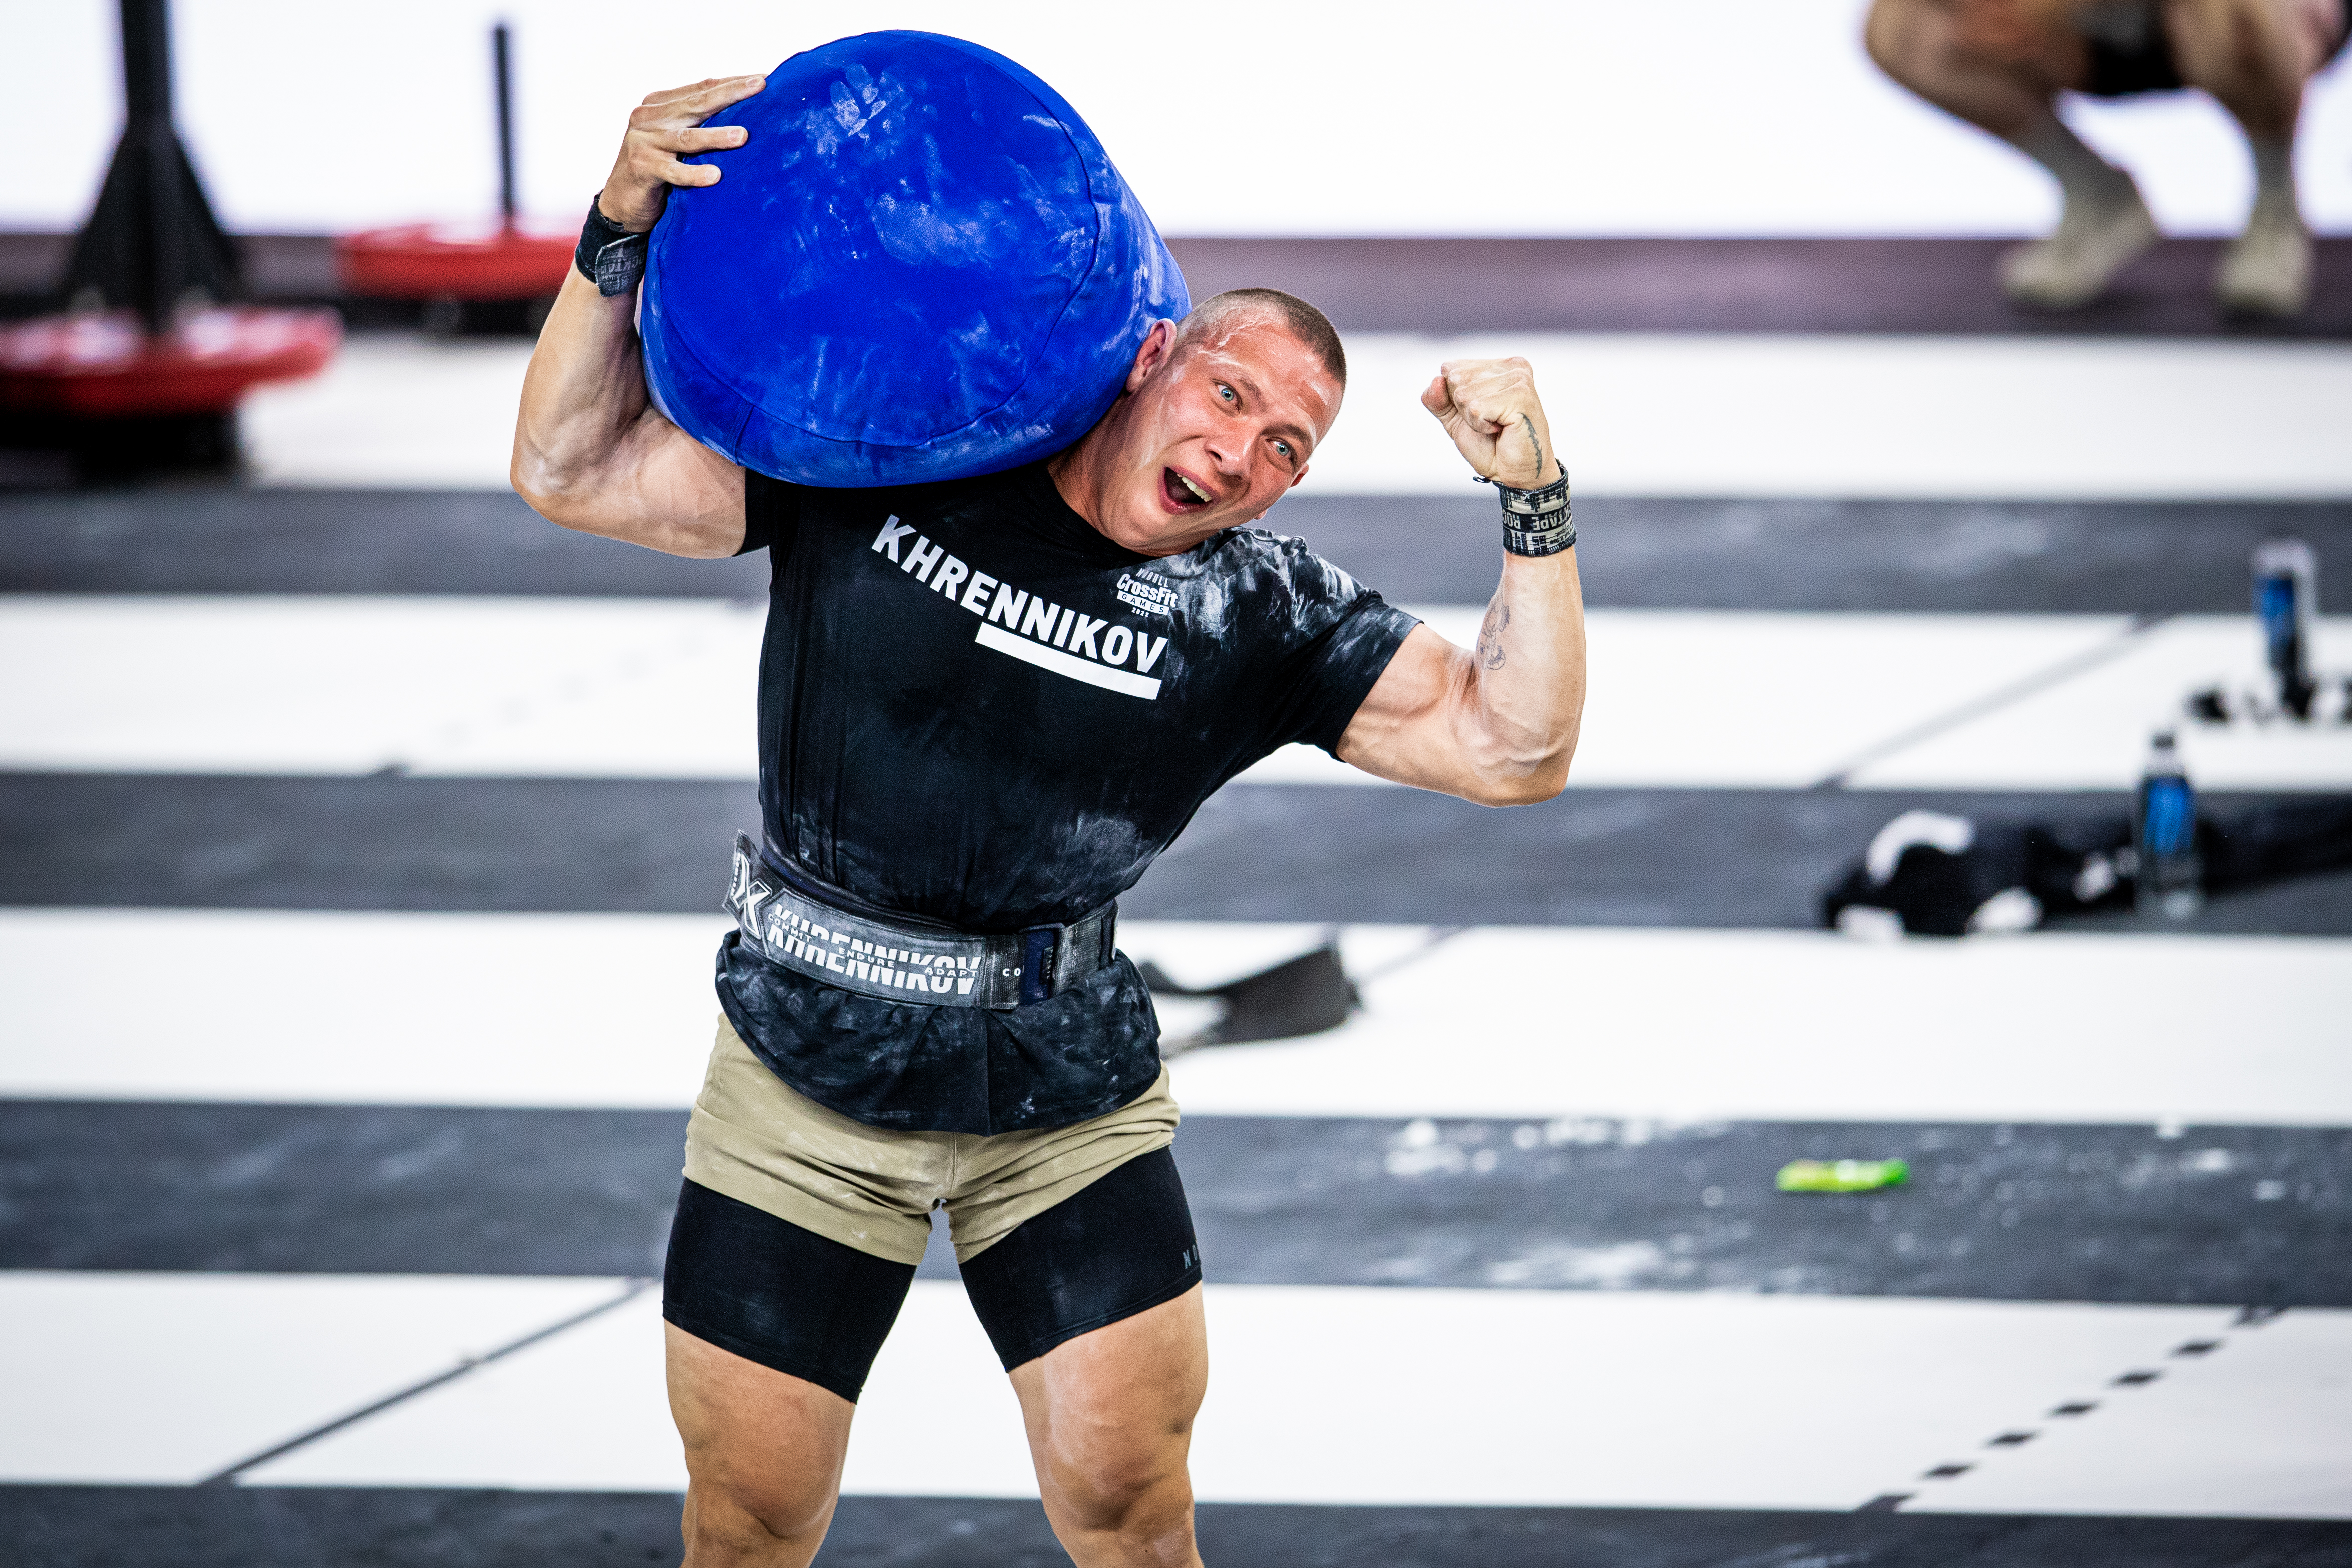 5 Reasons You Should Go to the CrossFit Games in Madison, WI